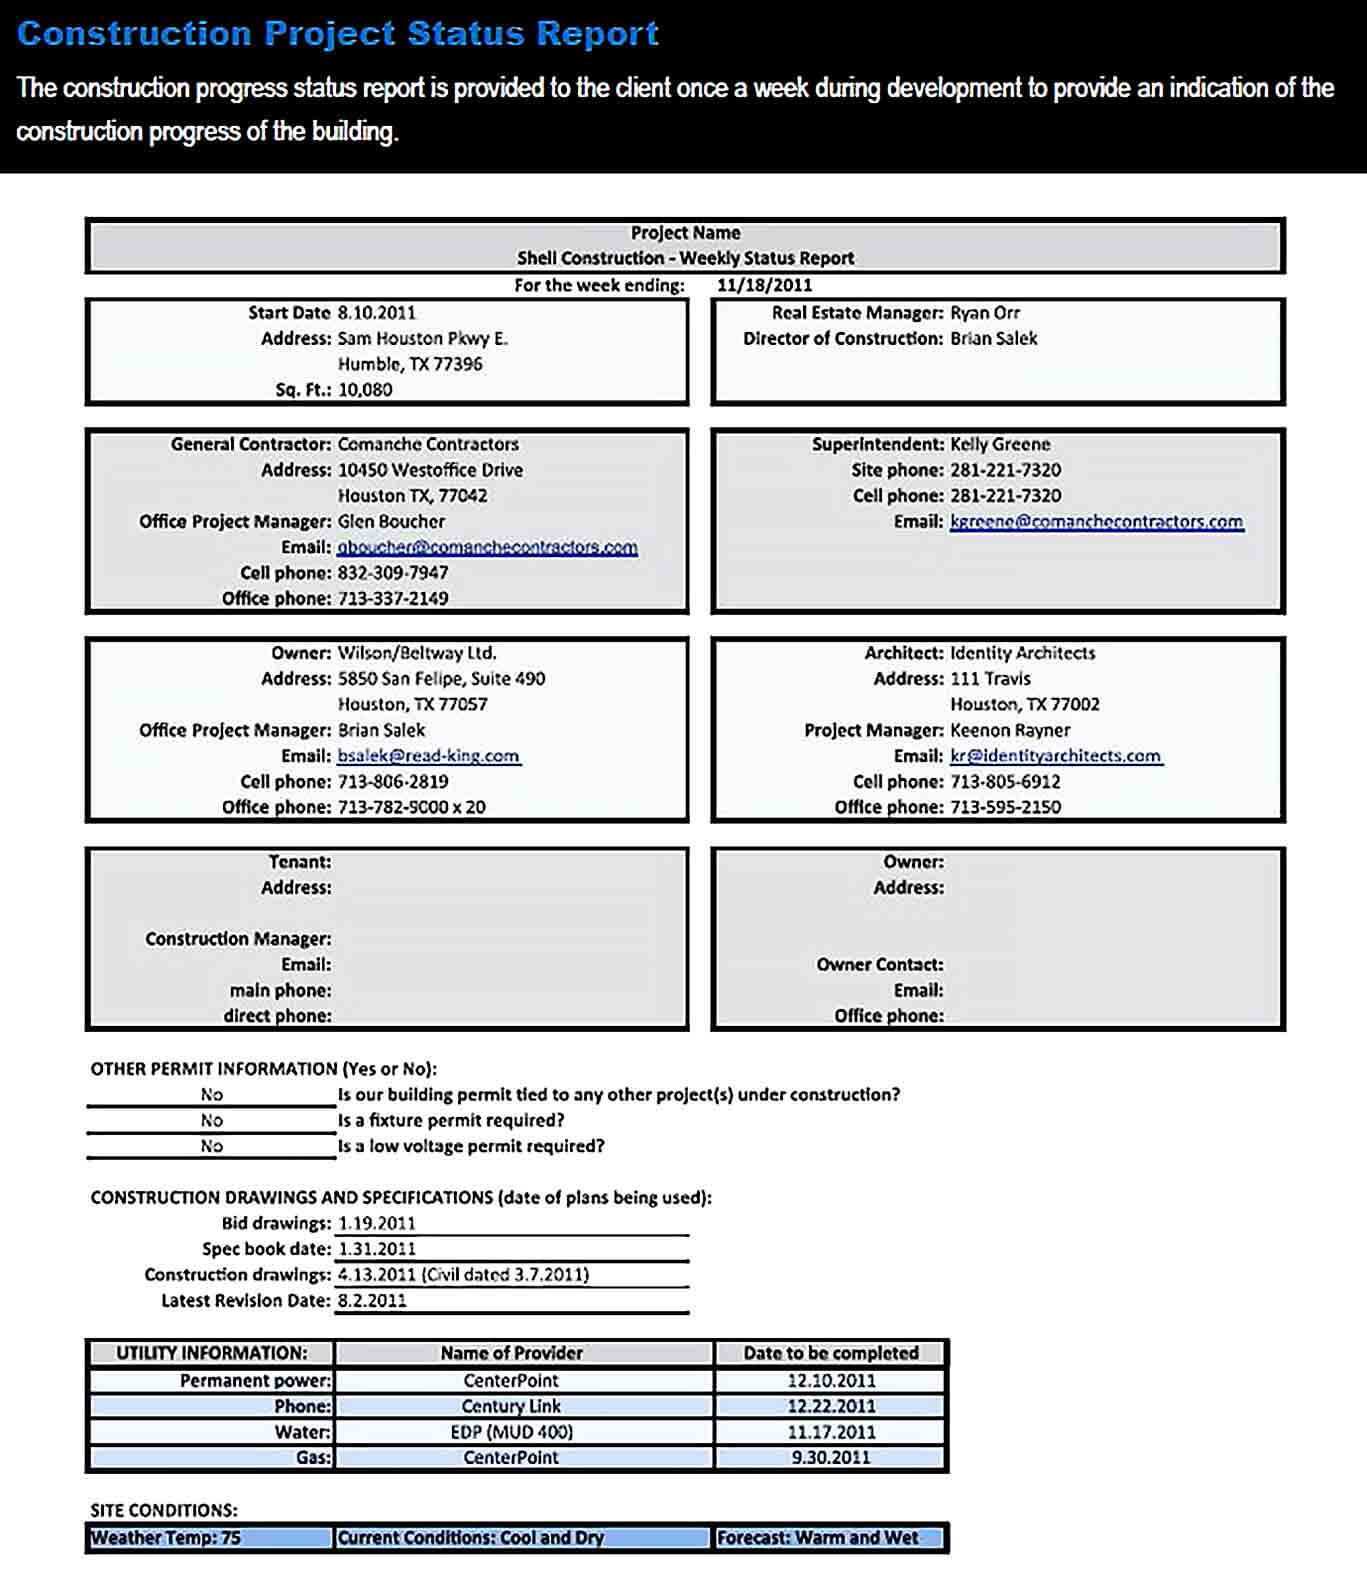 Sample Construction Project Status Report Template